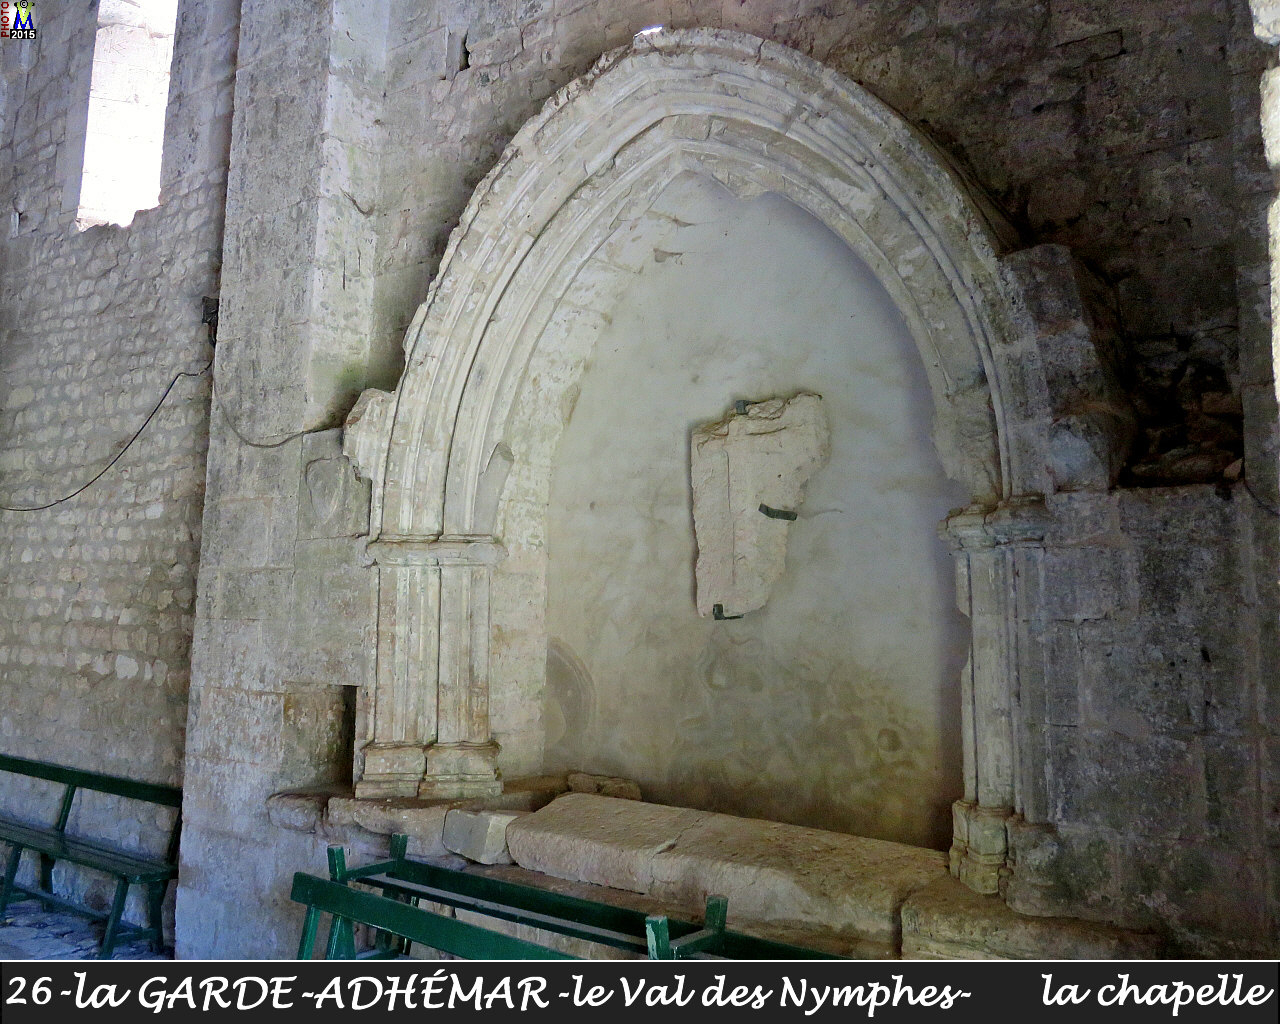 26GARDE-ADHEMARzVAL-NYMPHES_chapelle_210.jpg